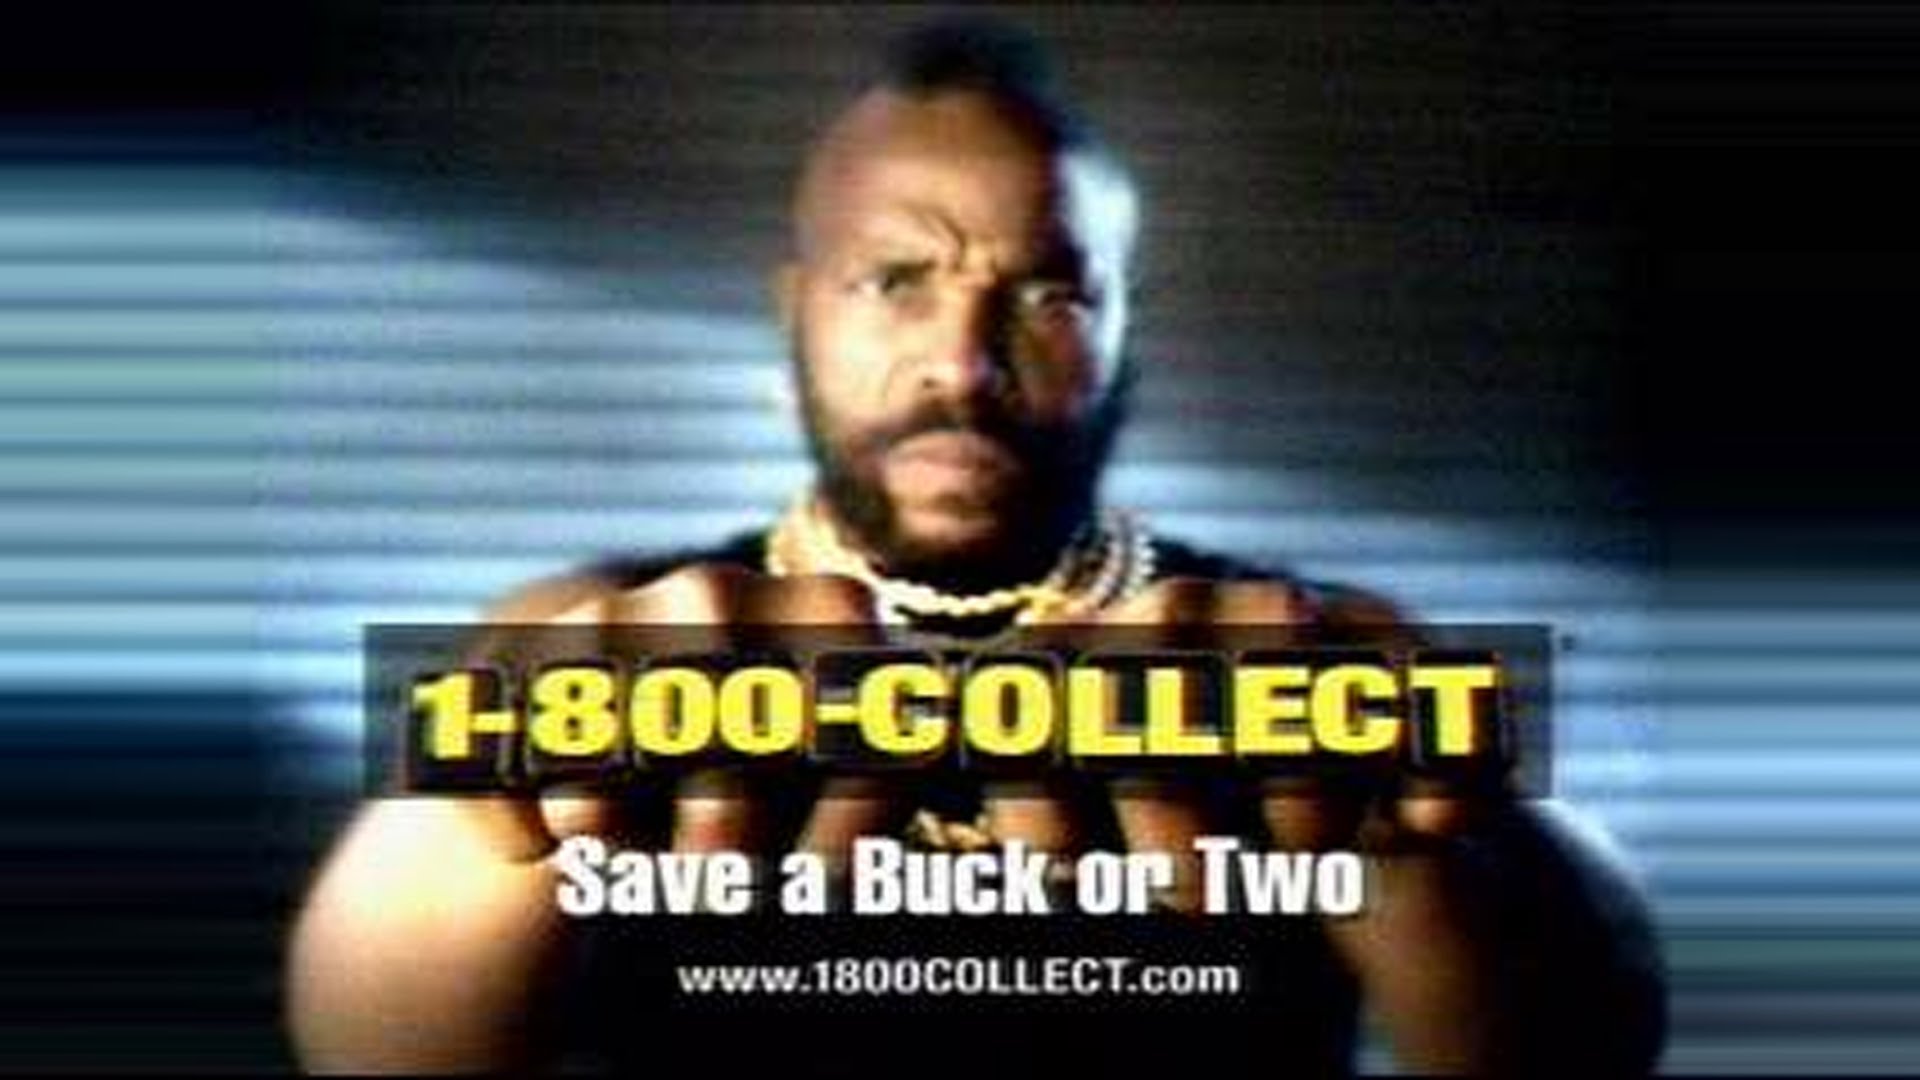 1-800-COLLECT STILL EXISTS